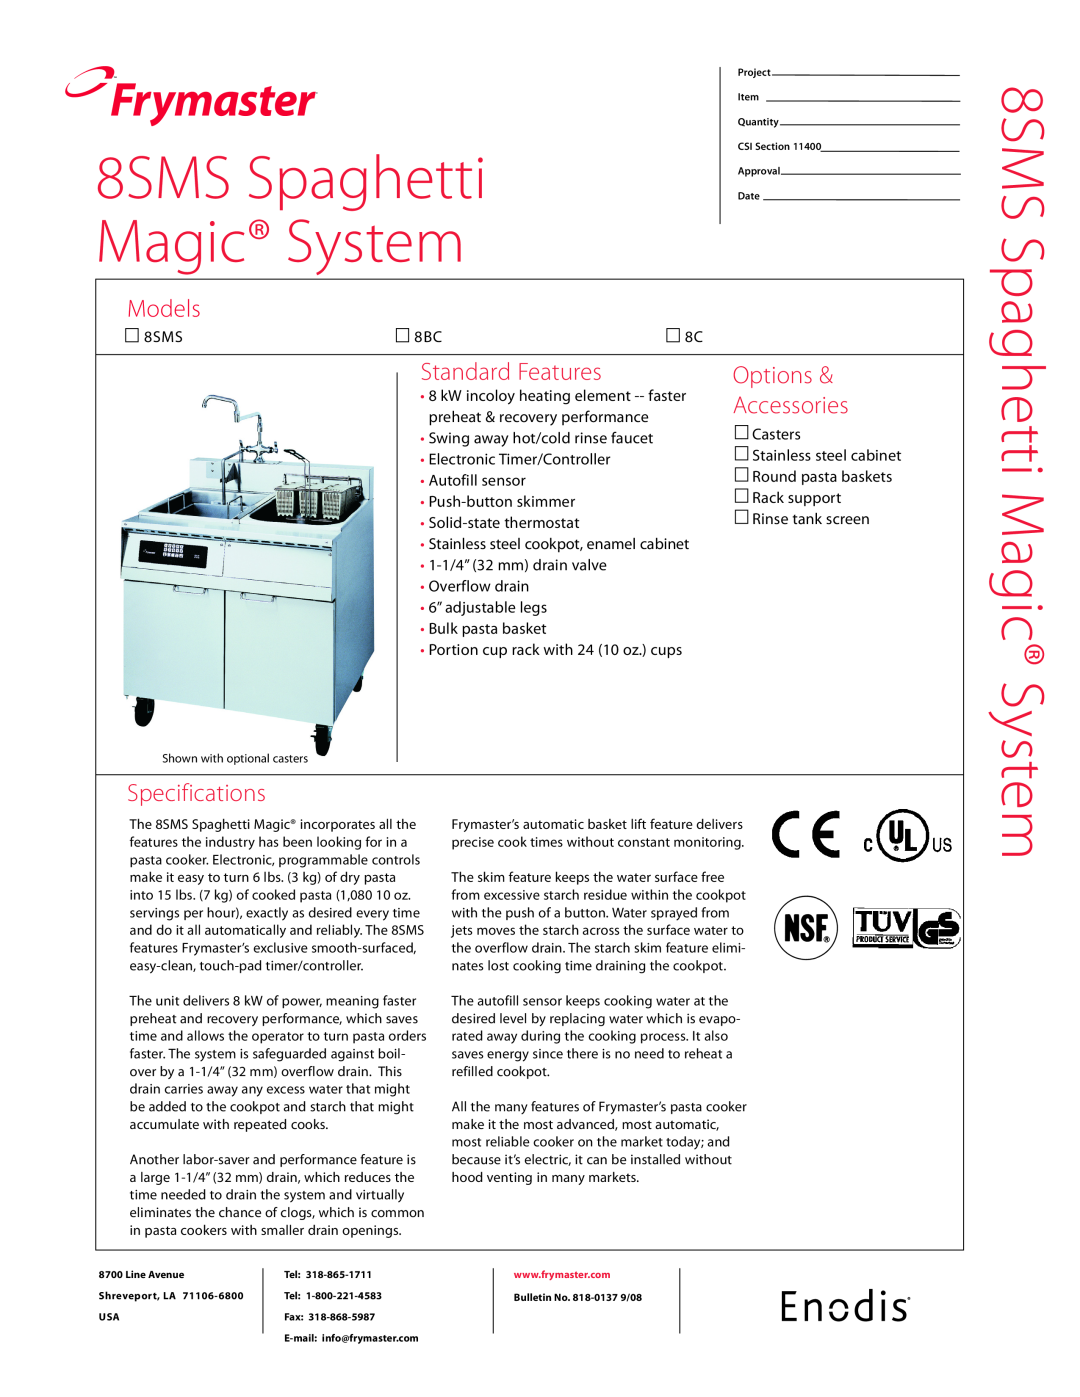 Frymaster 8BC, 8C specifications 8SMS Spaghetti Magic System, Frymaster, Models, Standard Features, Options 